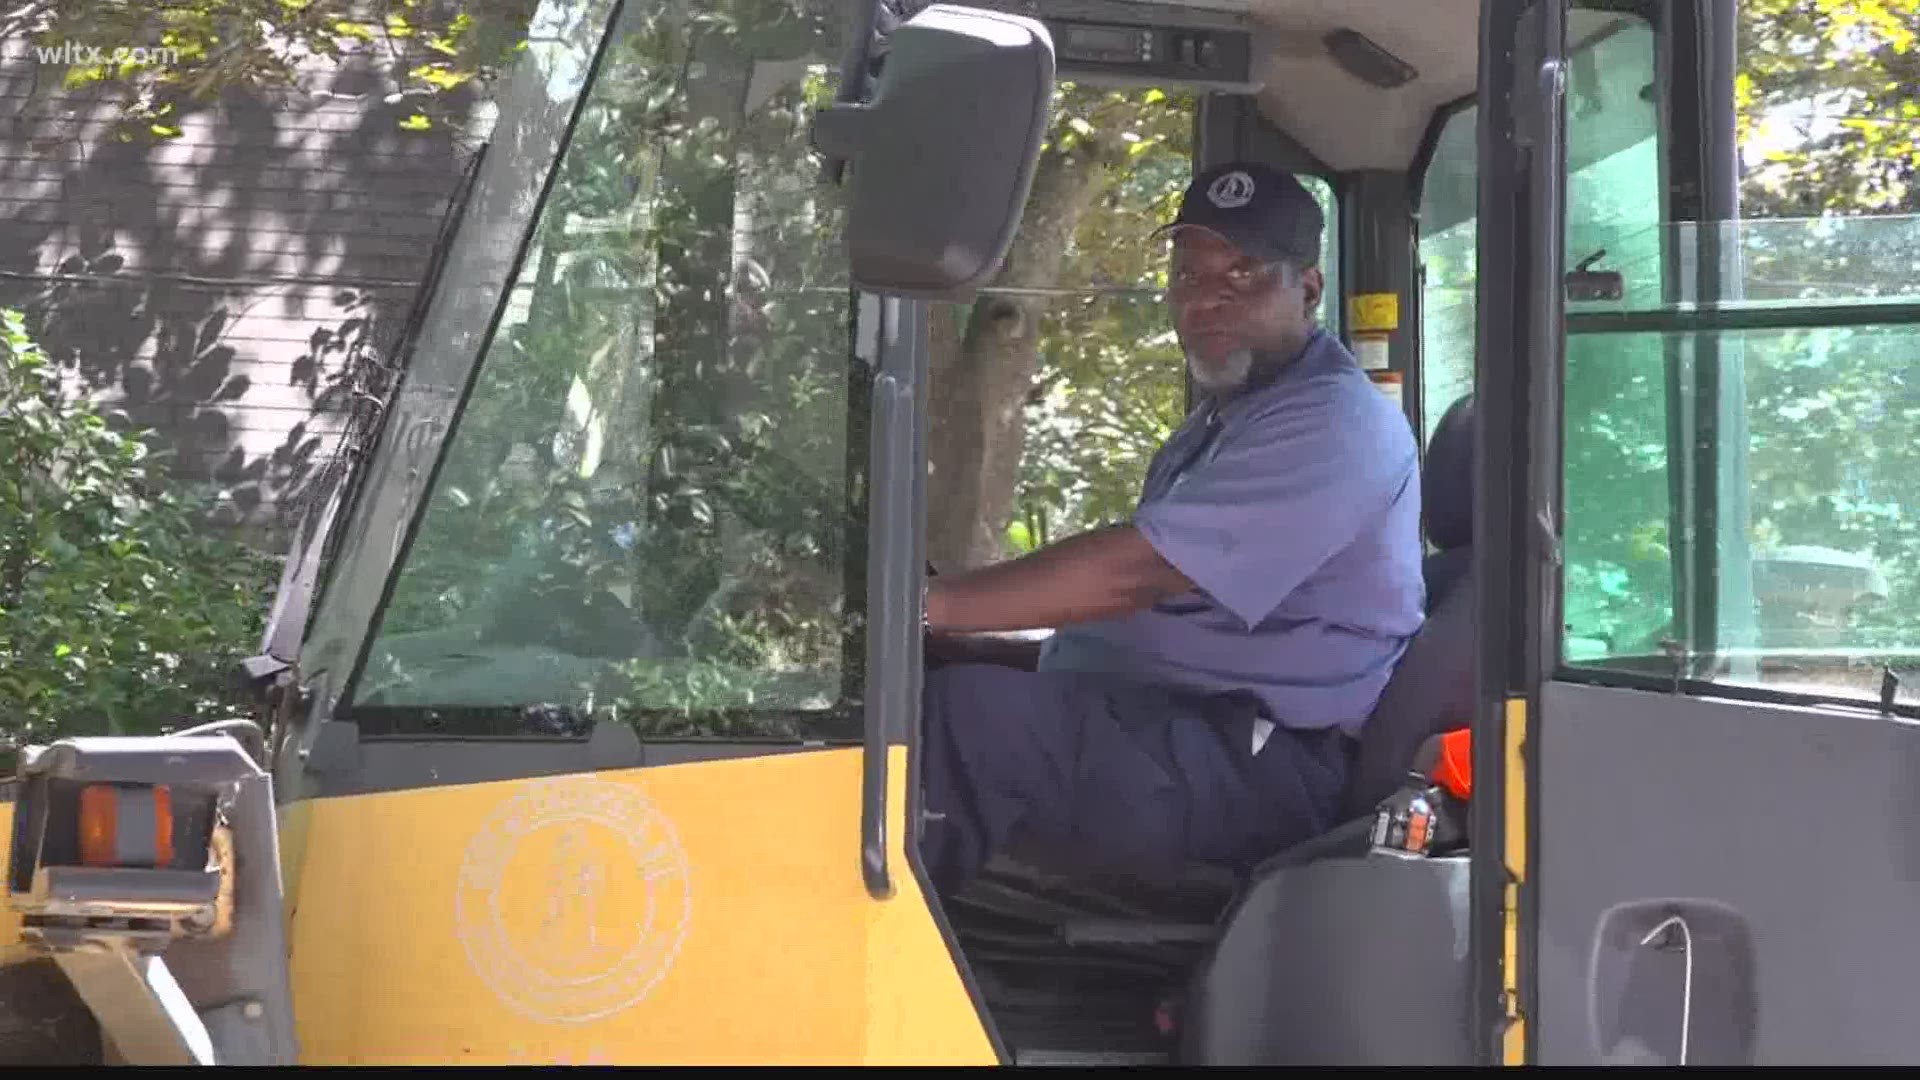 Oscar Davis has worked for the City of Columbia Public Works for 50 years.